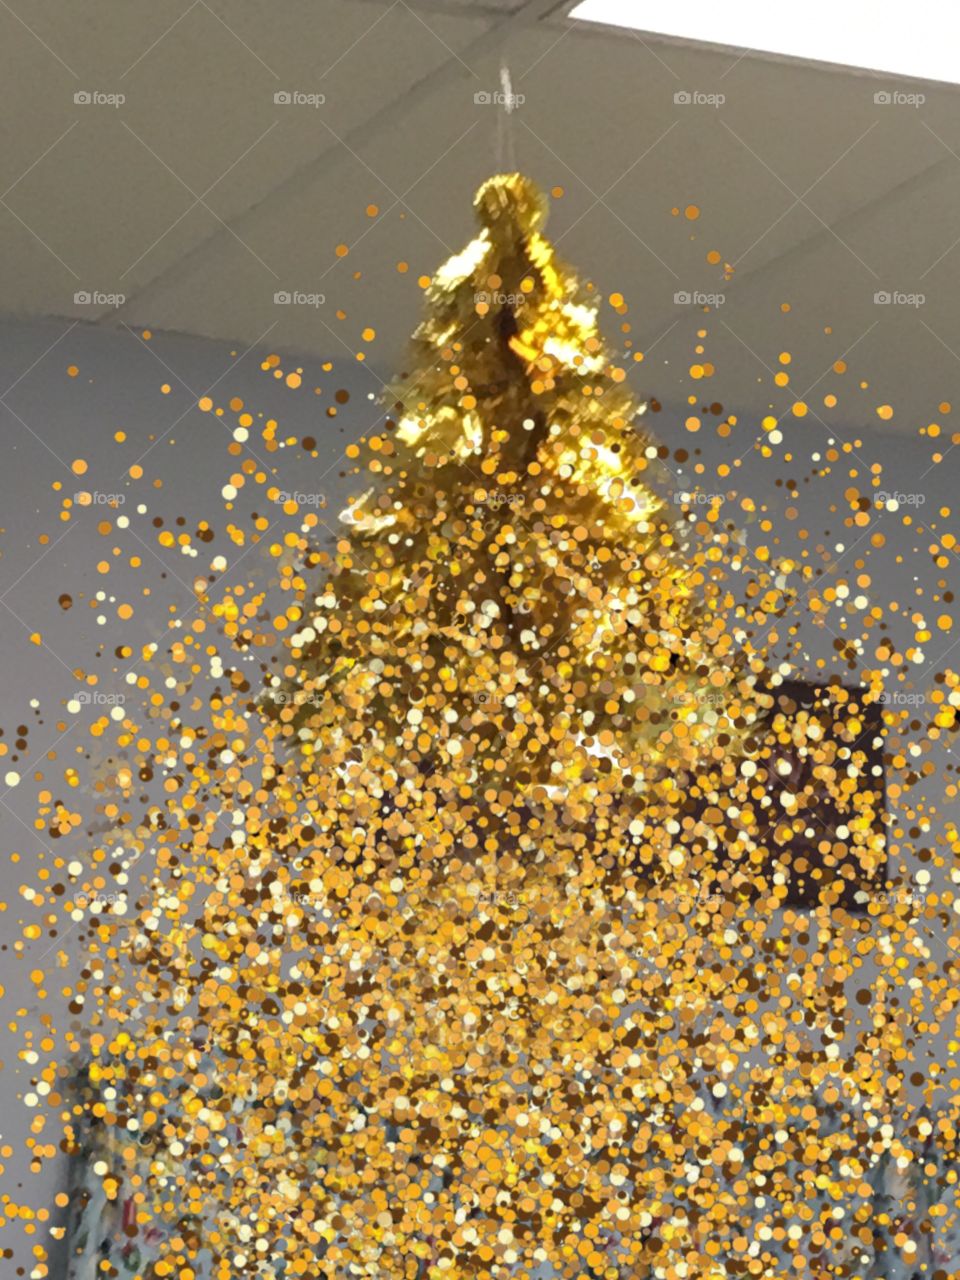 A big burst of gold to wish all foapers a very Merry Christmas and a happy new year!